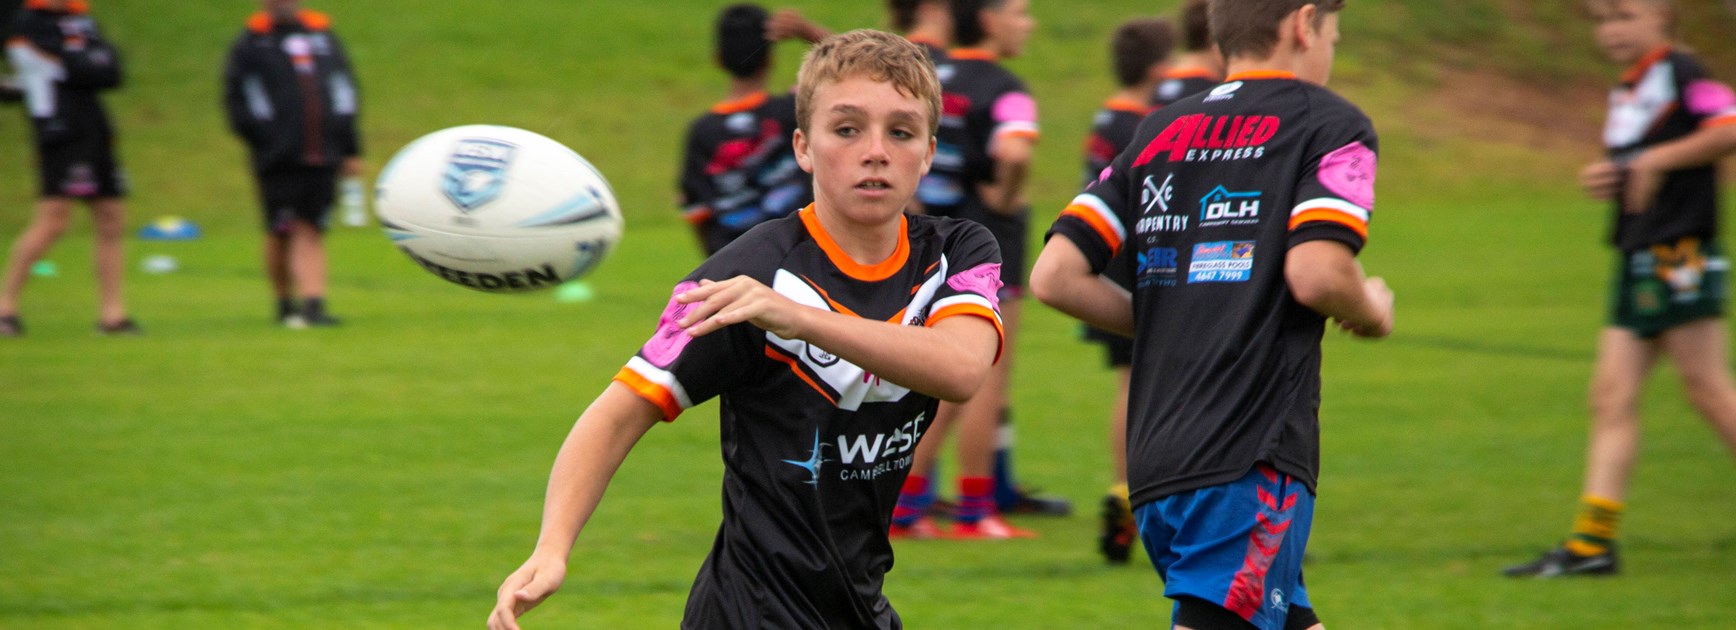 Wests Tigers hold Junior Talent ID Day